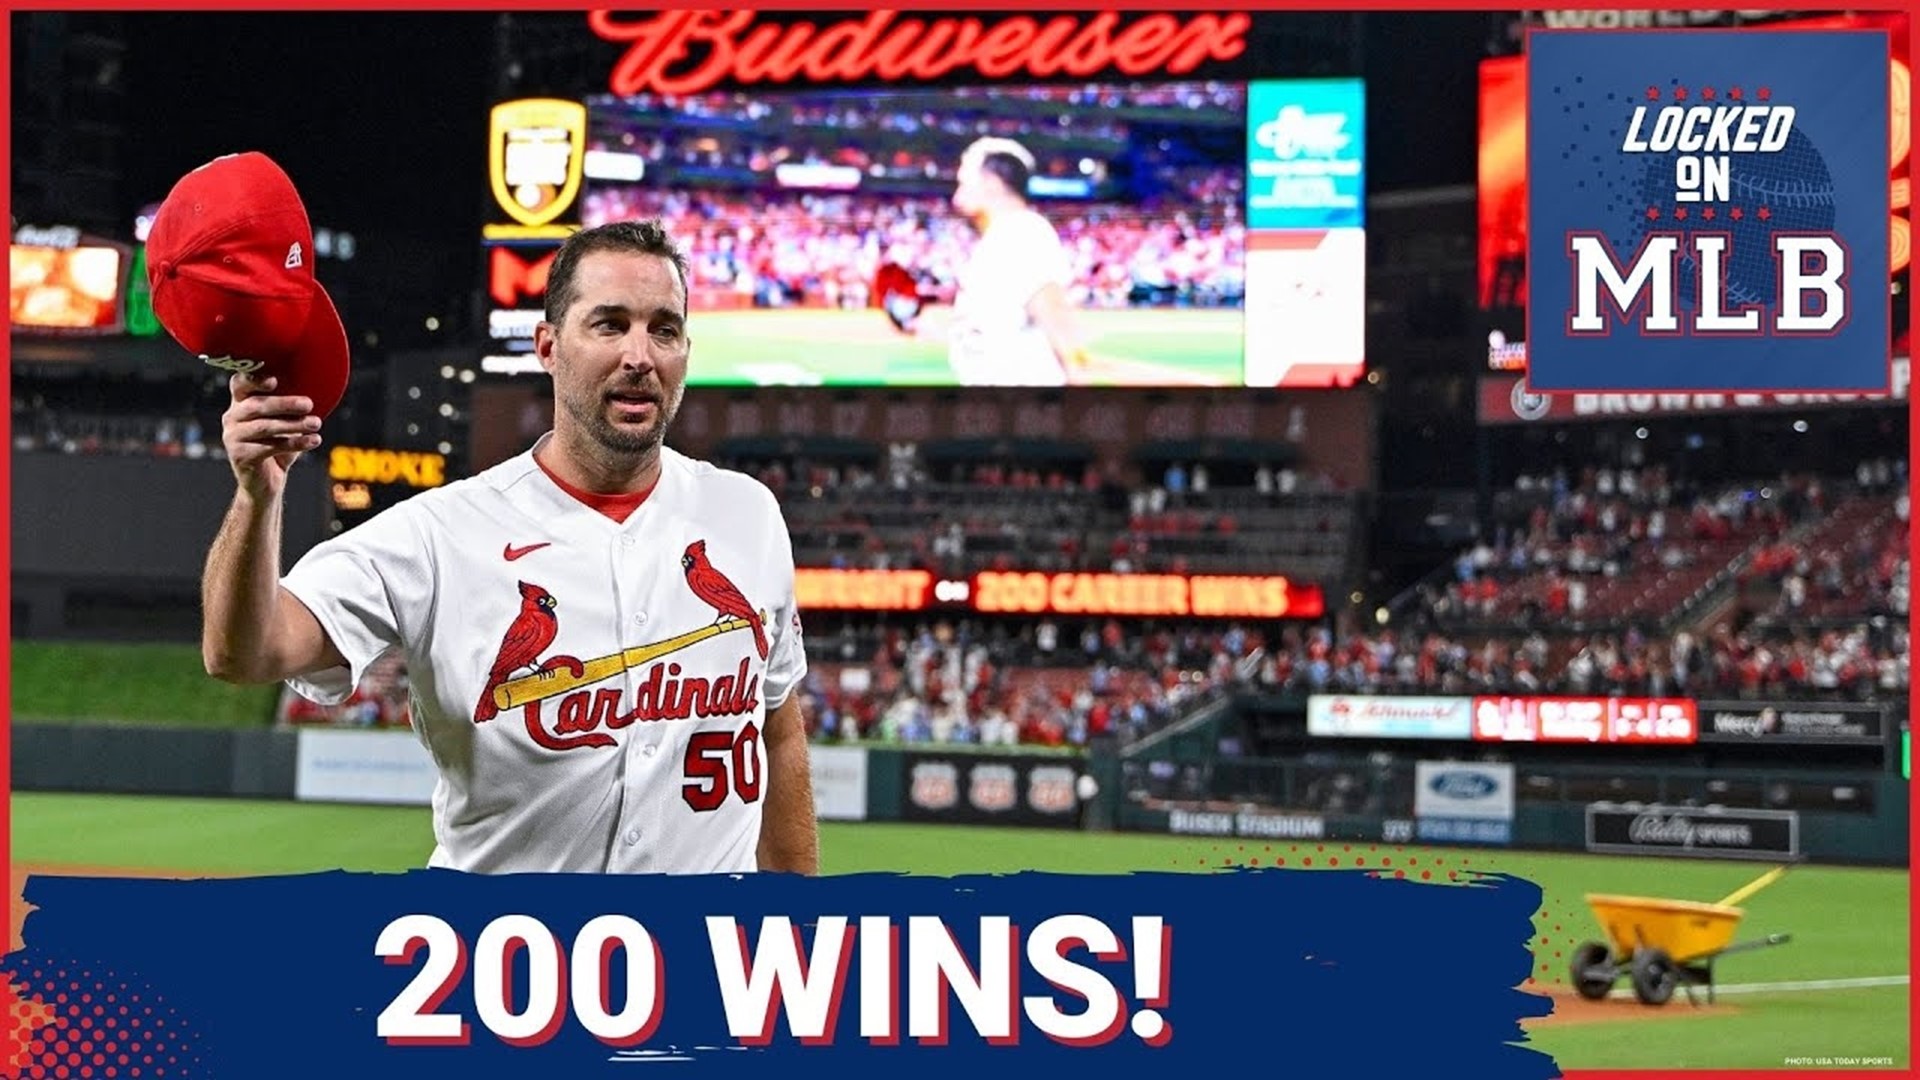 Adam Wainwright got to win 200 for his career. His time in St. Louis has had many highlights. When he retires, what will the identity of the Cardinals be?